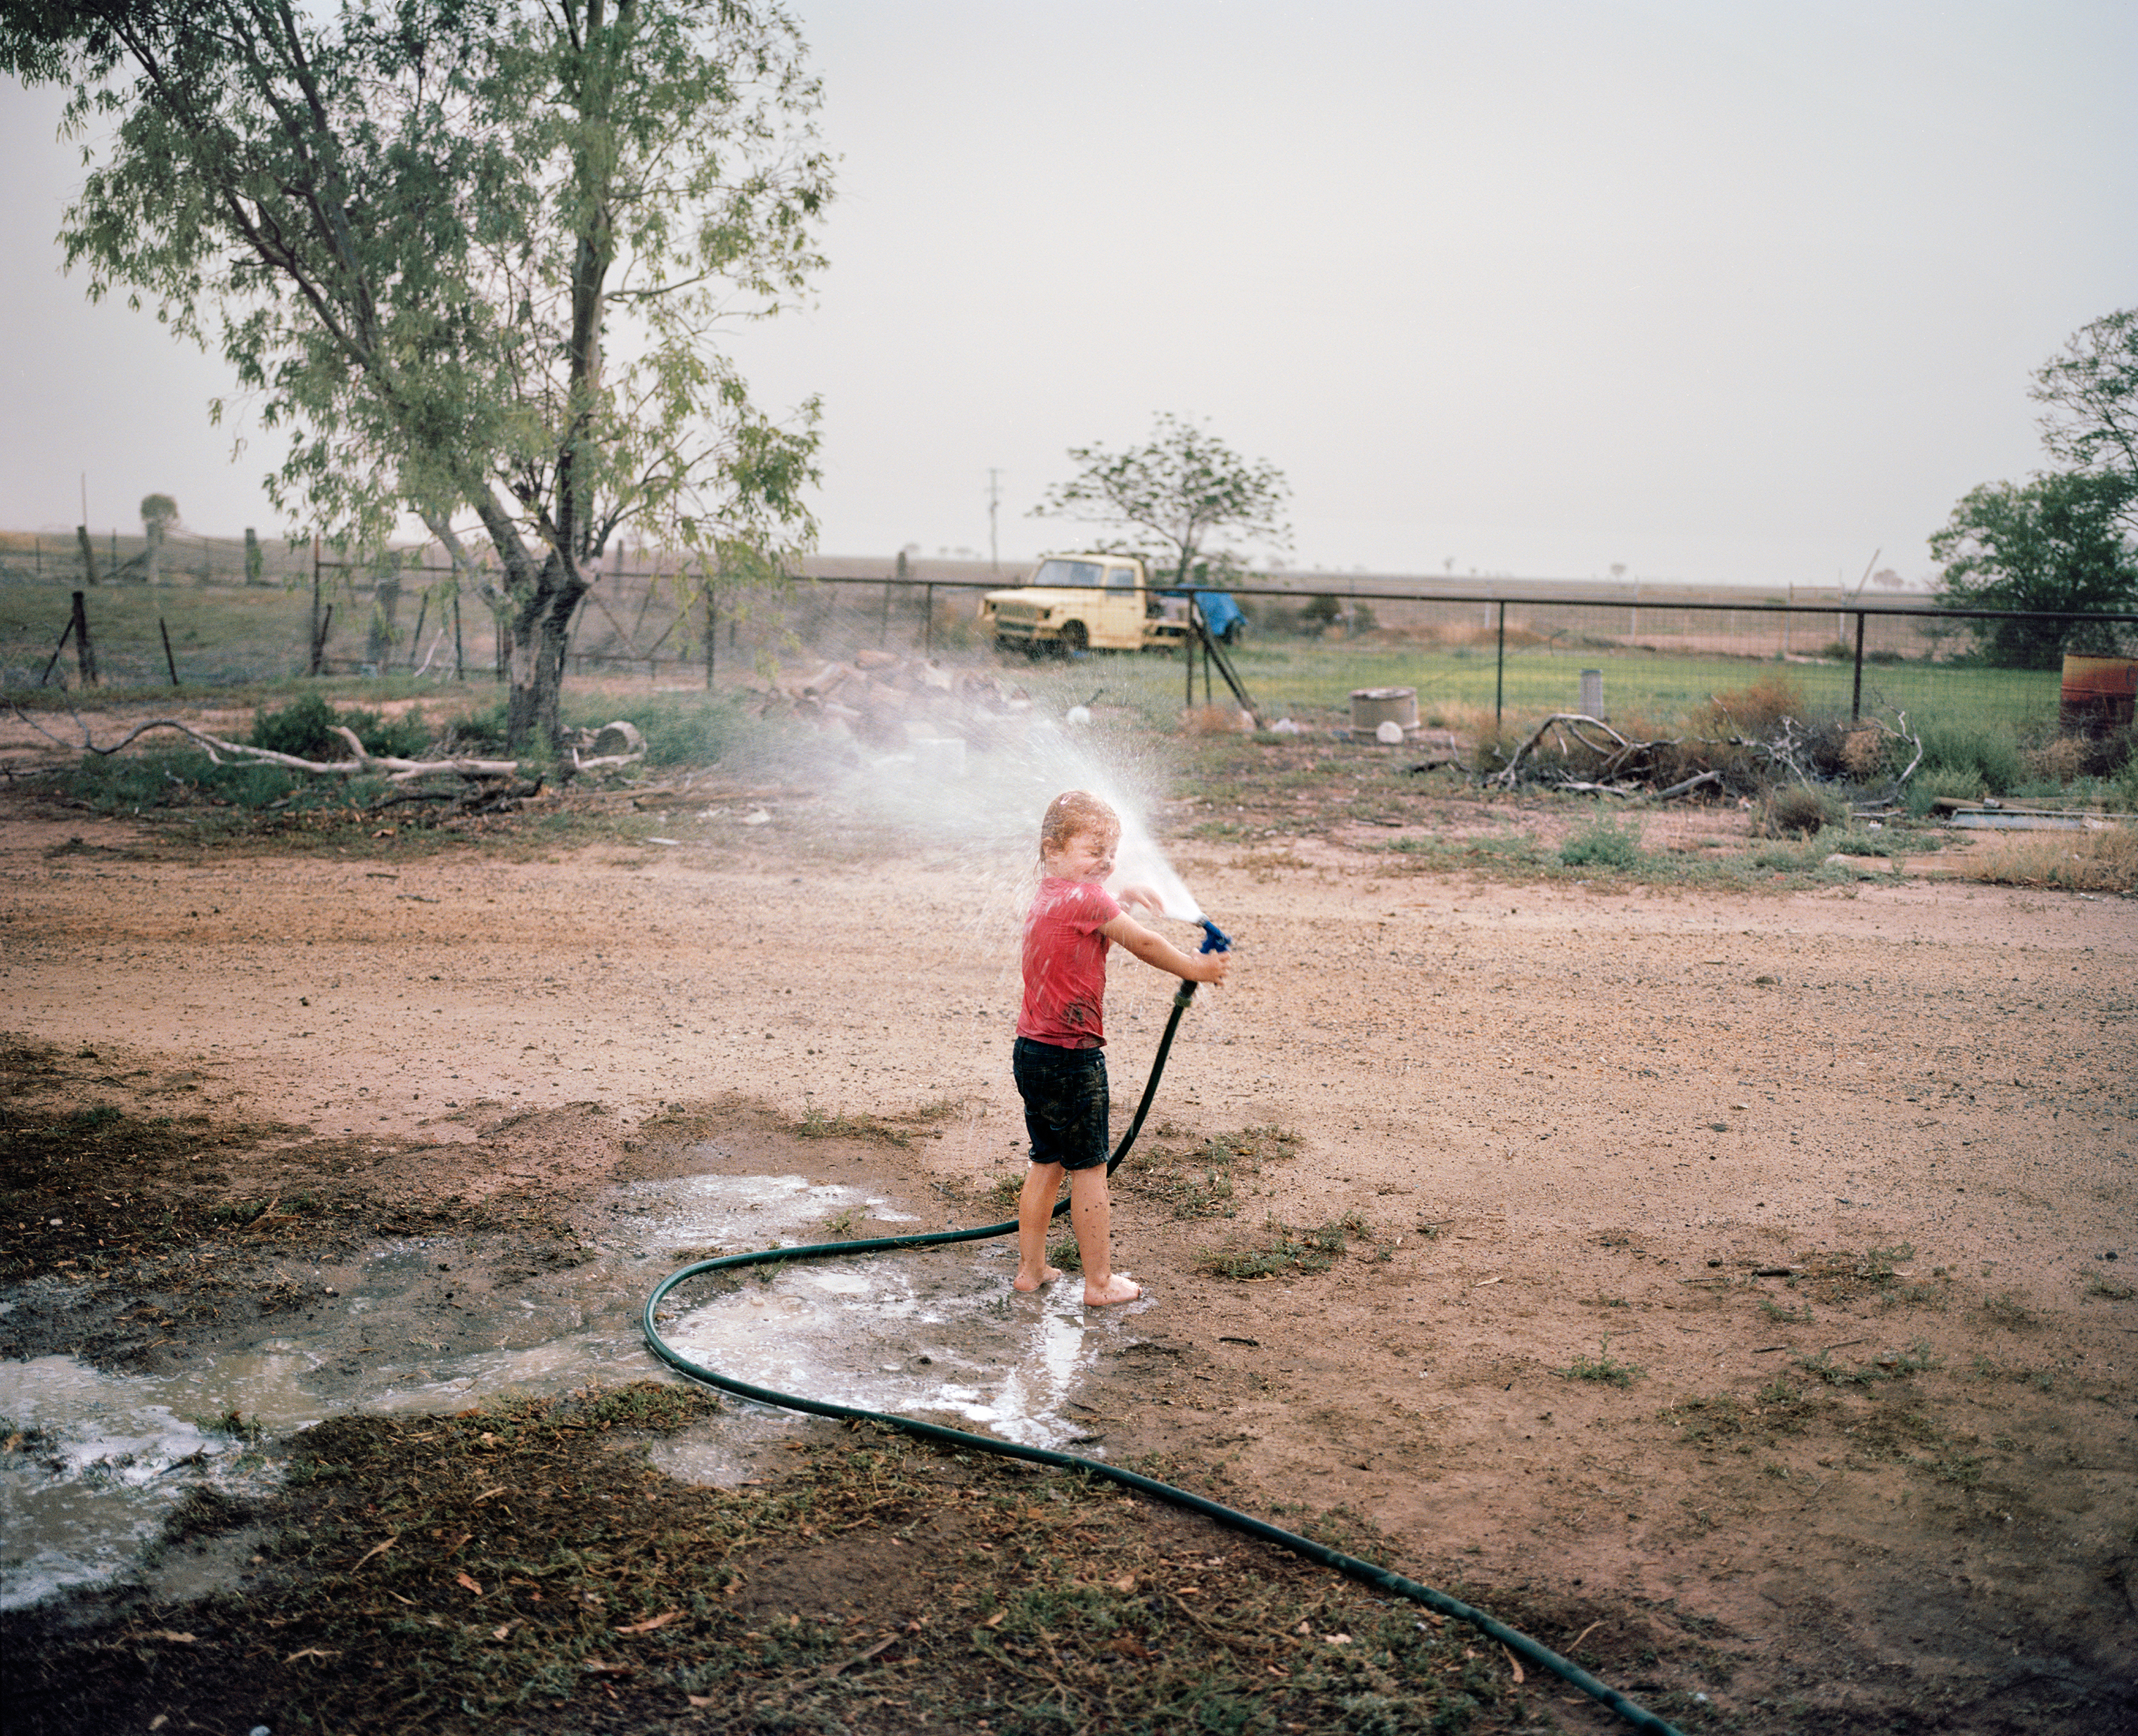 The daughter of farmer Ben Hawk plays with a hose at a Come by Chance store in New South Wales in December. Hawk did not plant crops last year because of the drought. While believing it's up to farmers to run a diverse business that is resilient enough to drought, Hawk says "it will be time to make some tough decisions if it doesn't rain in 2019." (Adam Ferguson for TIME)